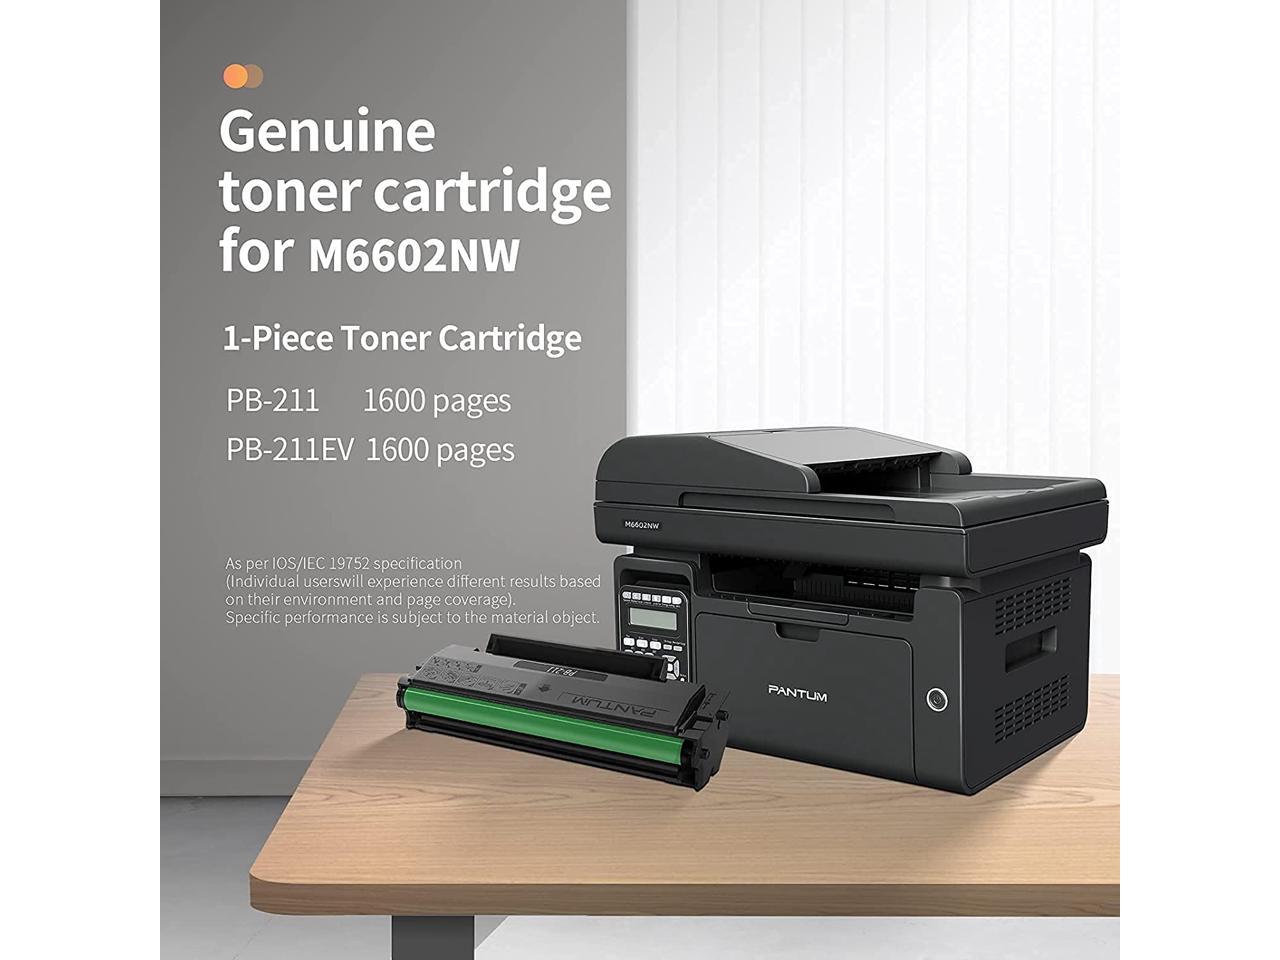 Print at 23PPM in Black and White All-in-One Monochrome Wireless Laser Printer with Scanner Copier Fax and ADF Pantum M6602NW 